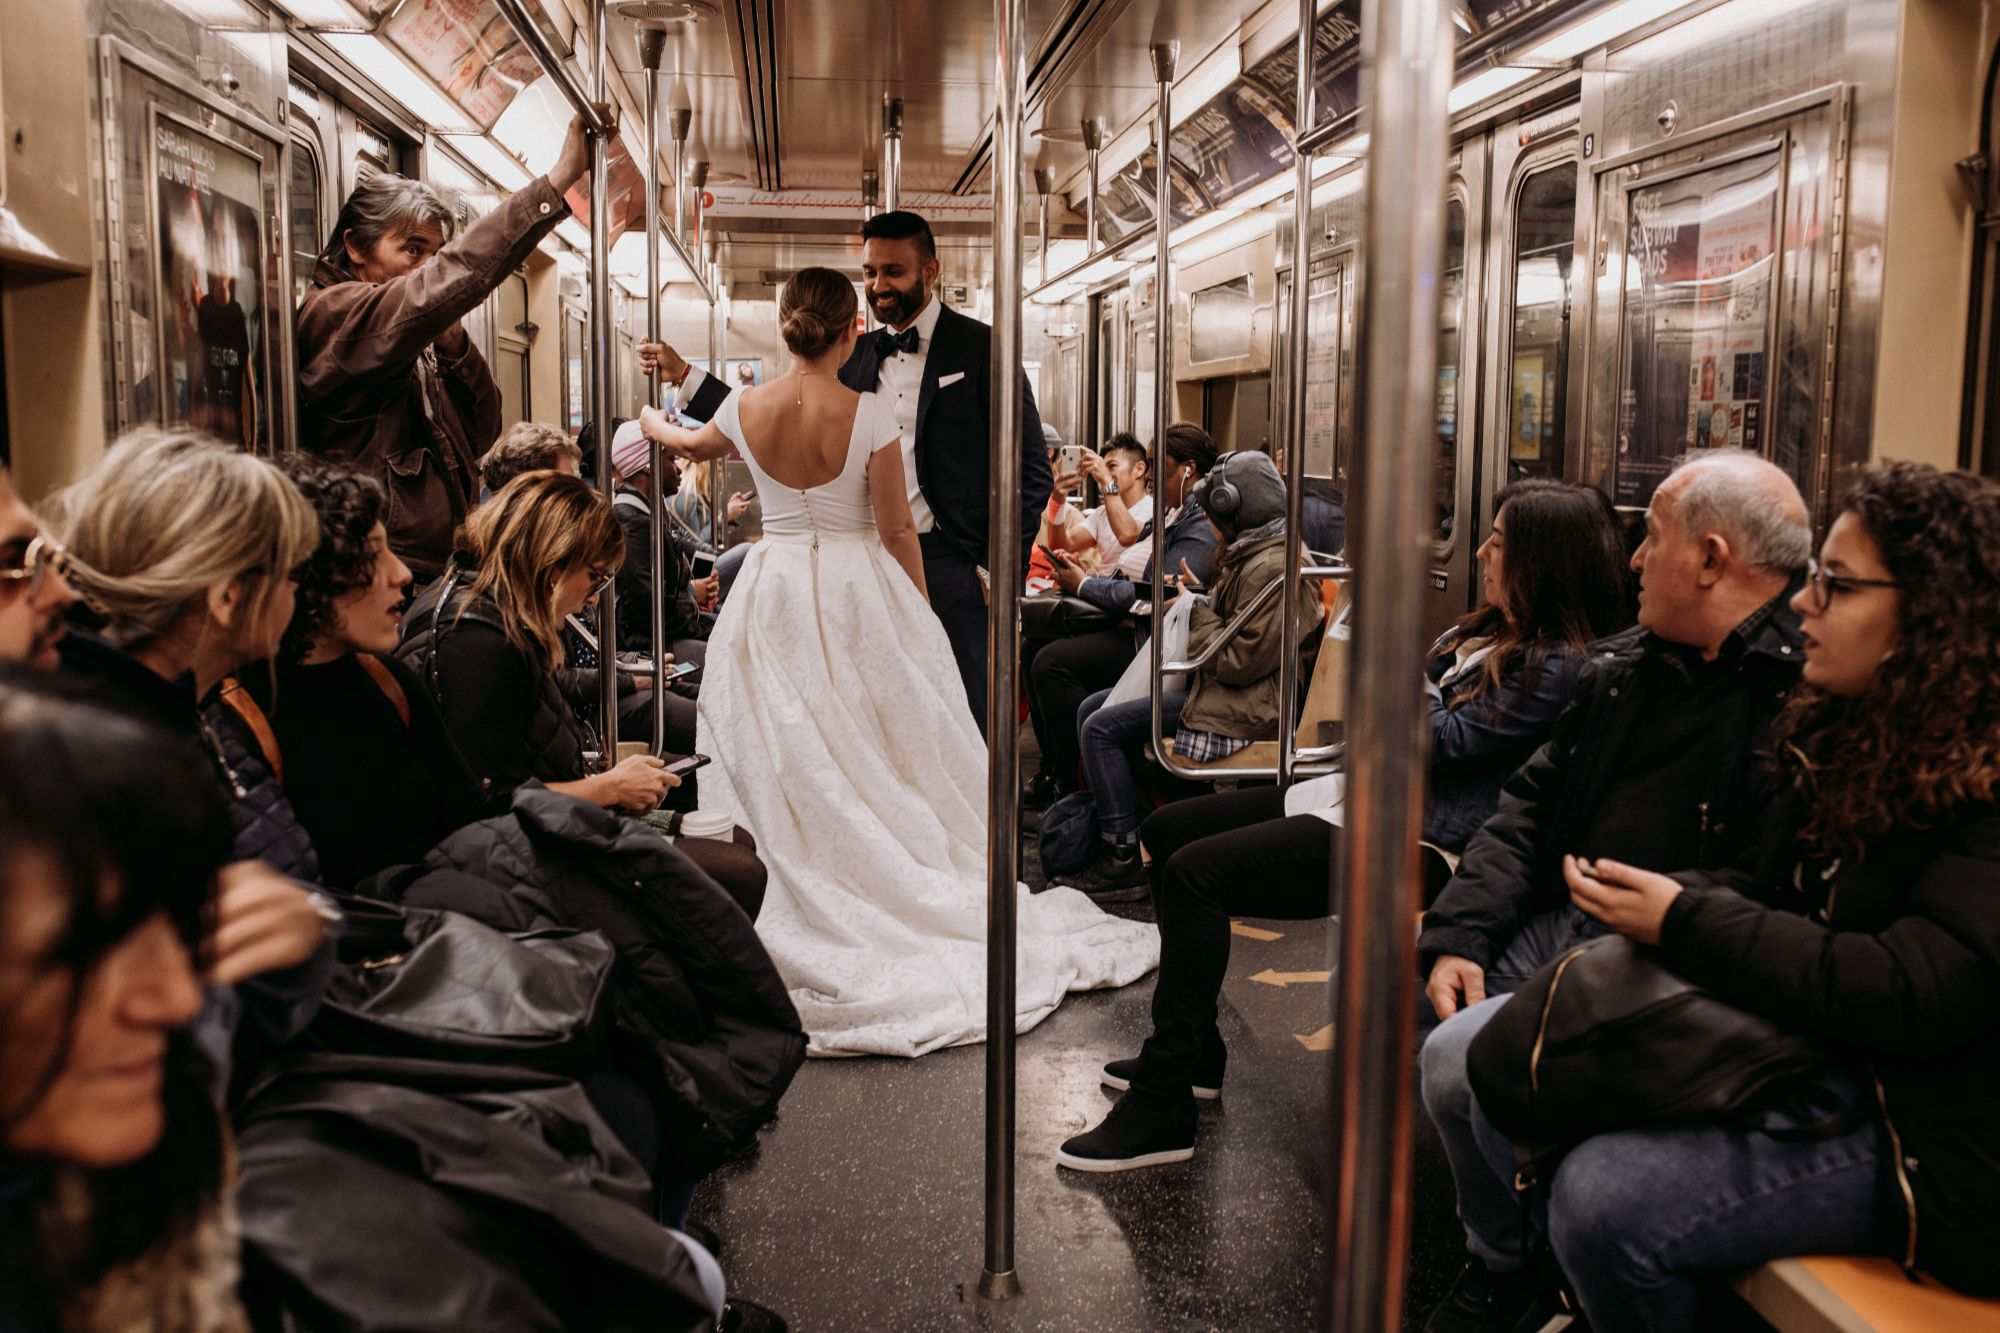 Bride and groom in New York subway.